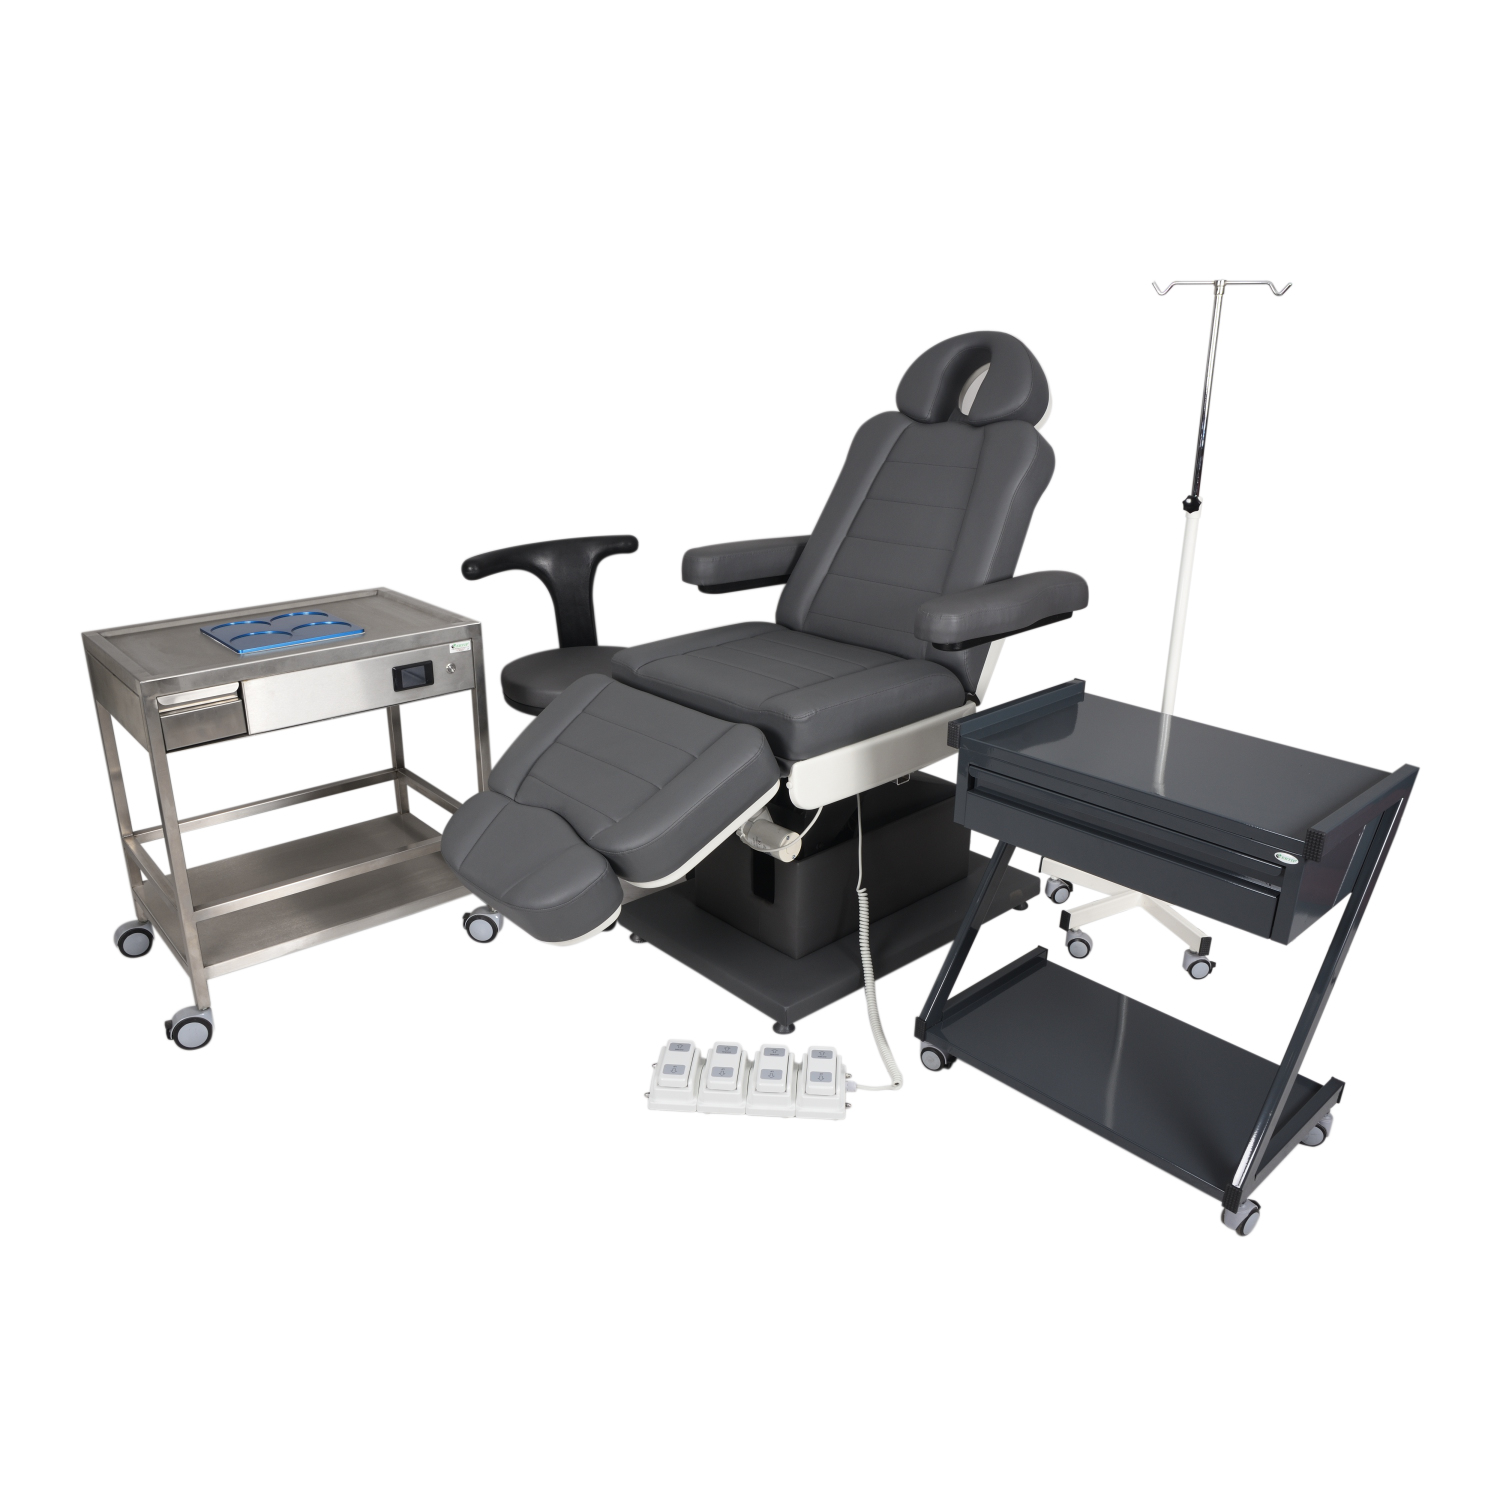 COMFORT VIP Hair Transplant and Medical Aesthetic Chair Gray